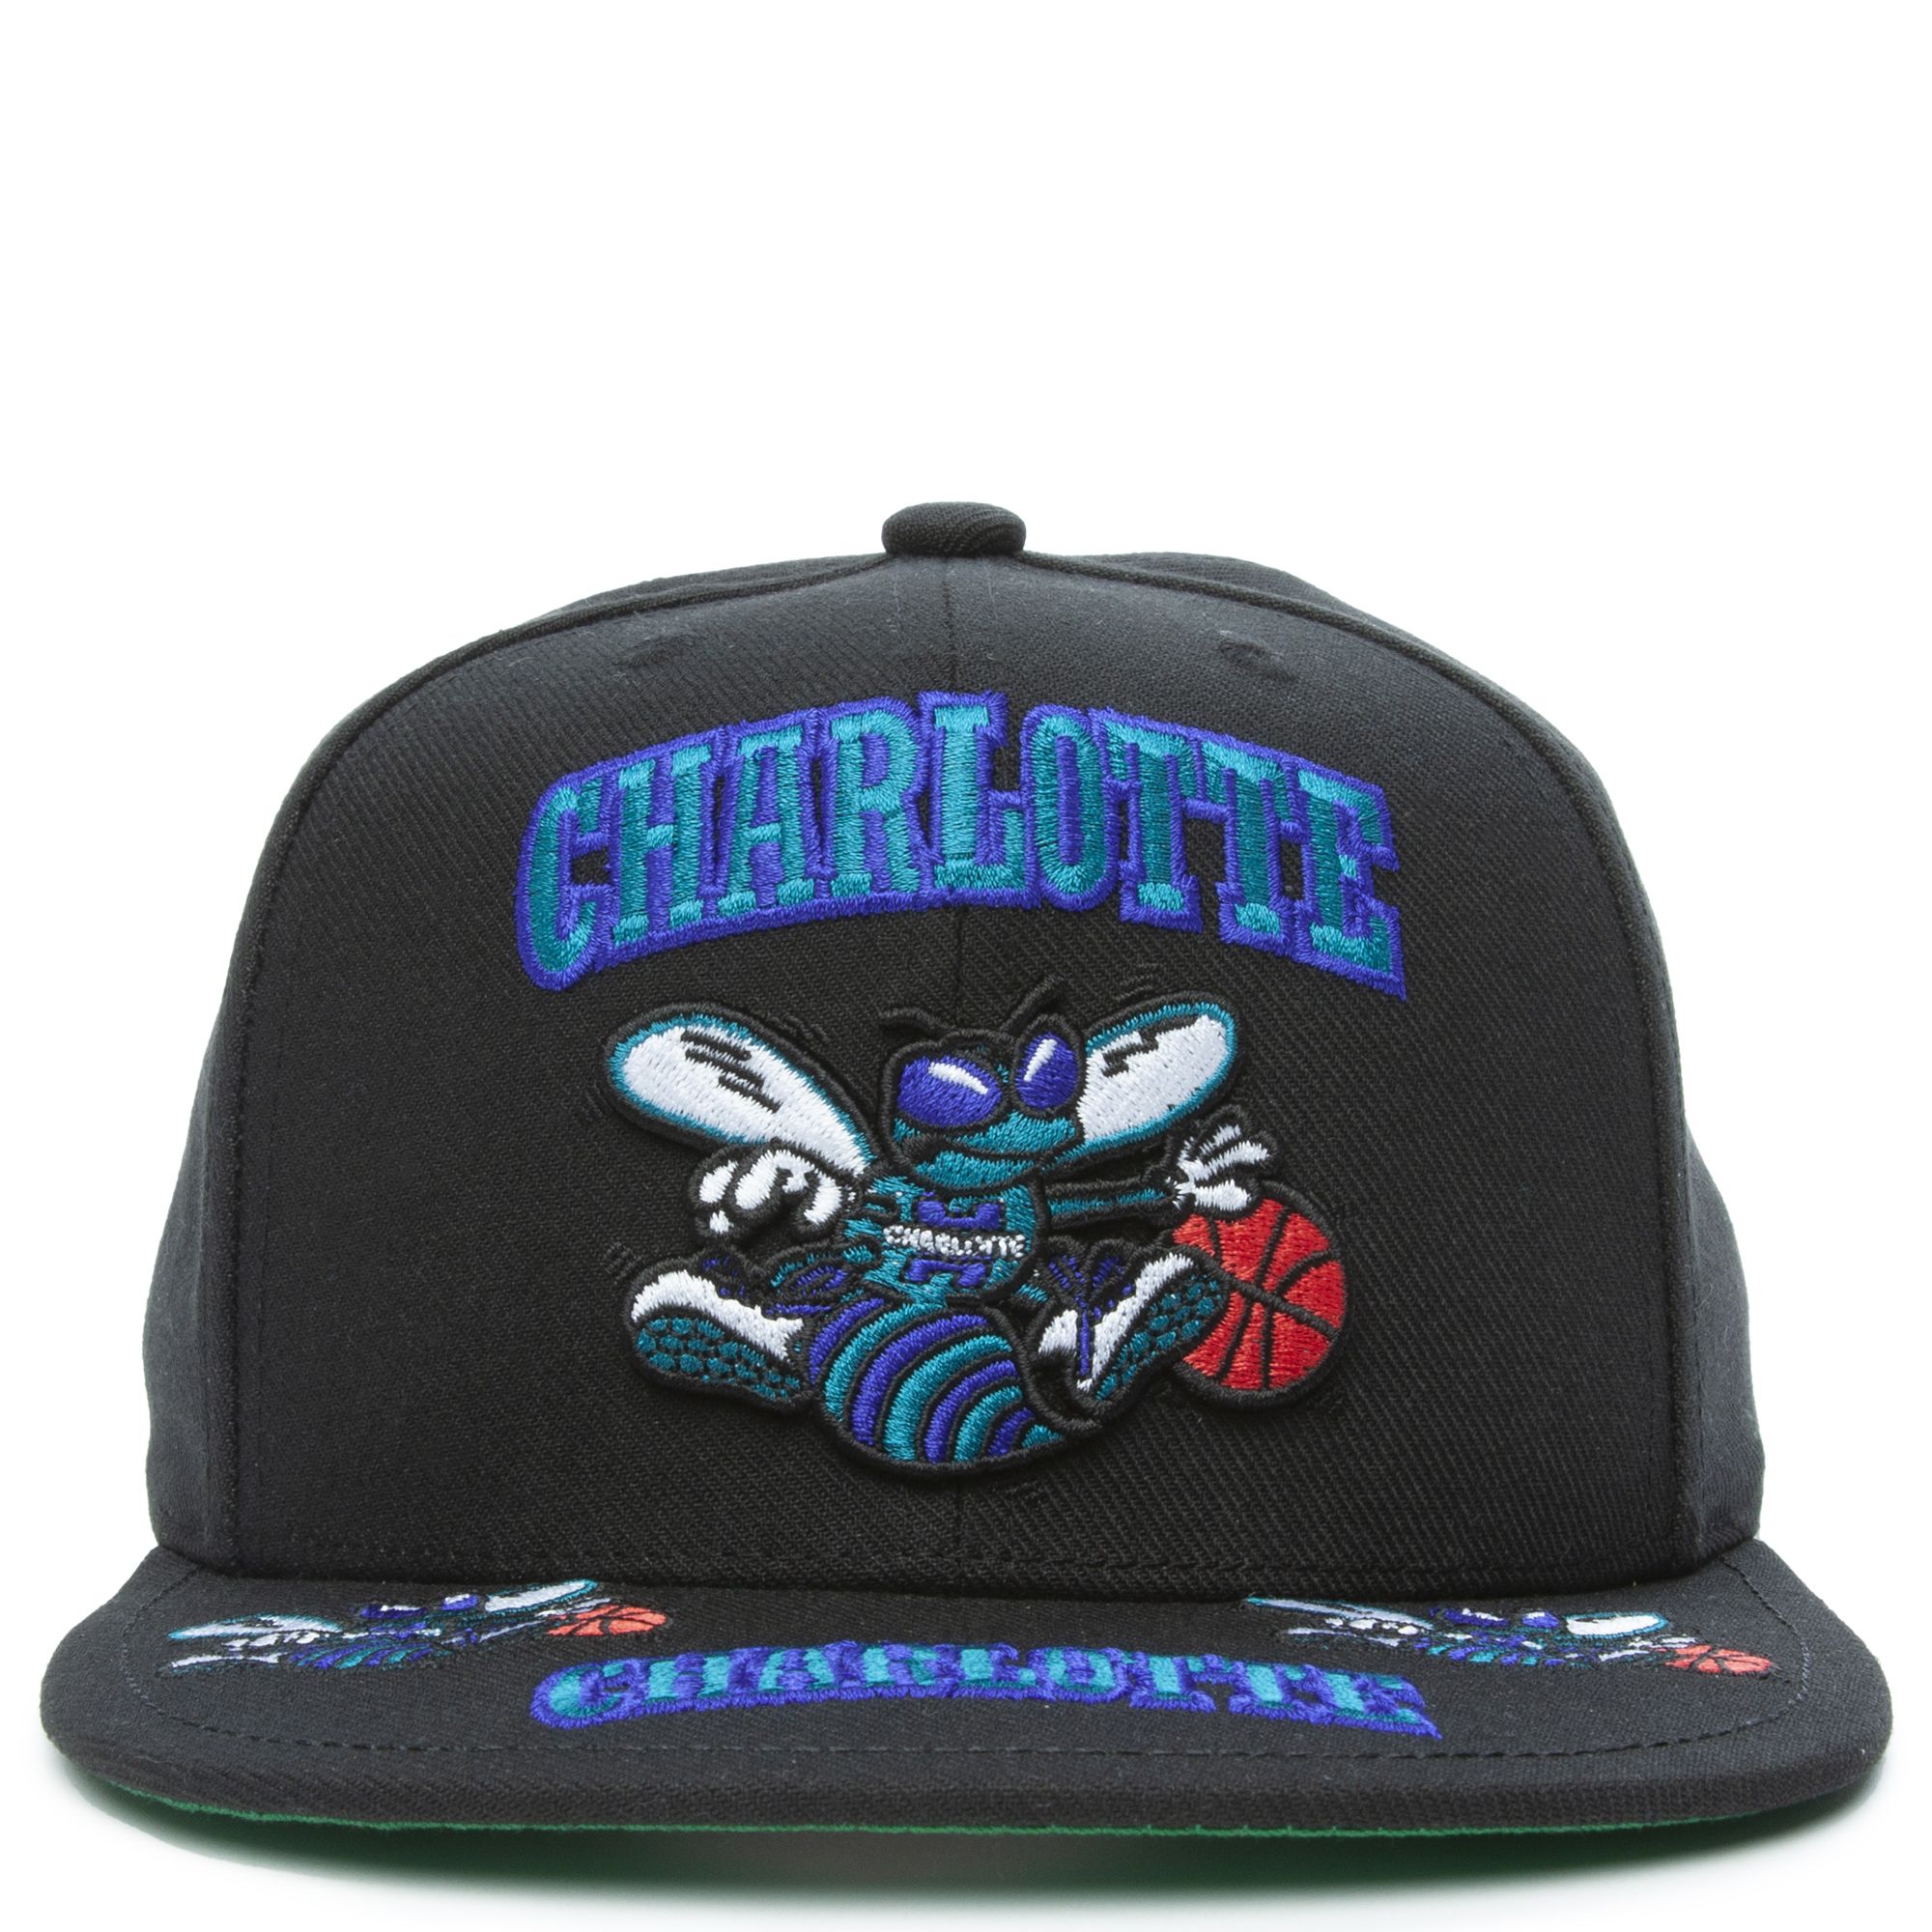 CHARLOTTE HORNETS FRONT LOADED SNAPBACK HAT HHSS2997-CHOYYPPPBLCK